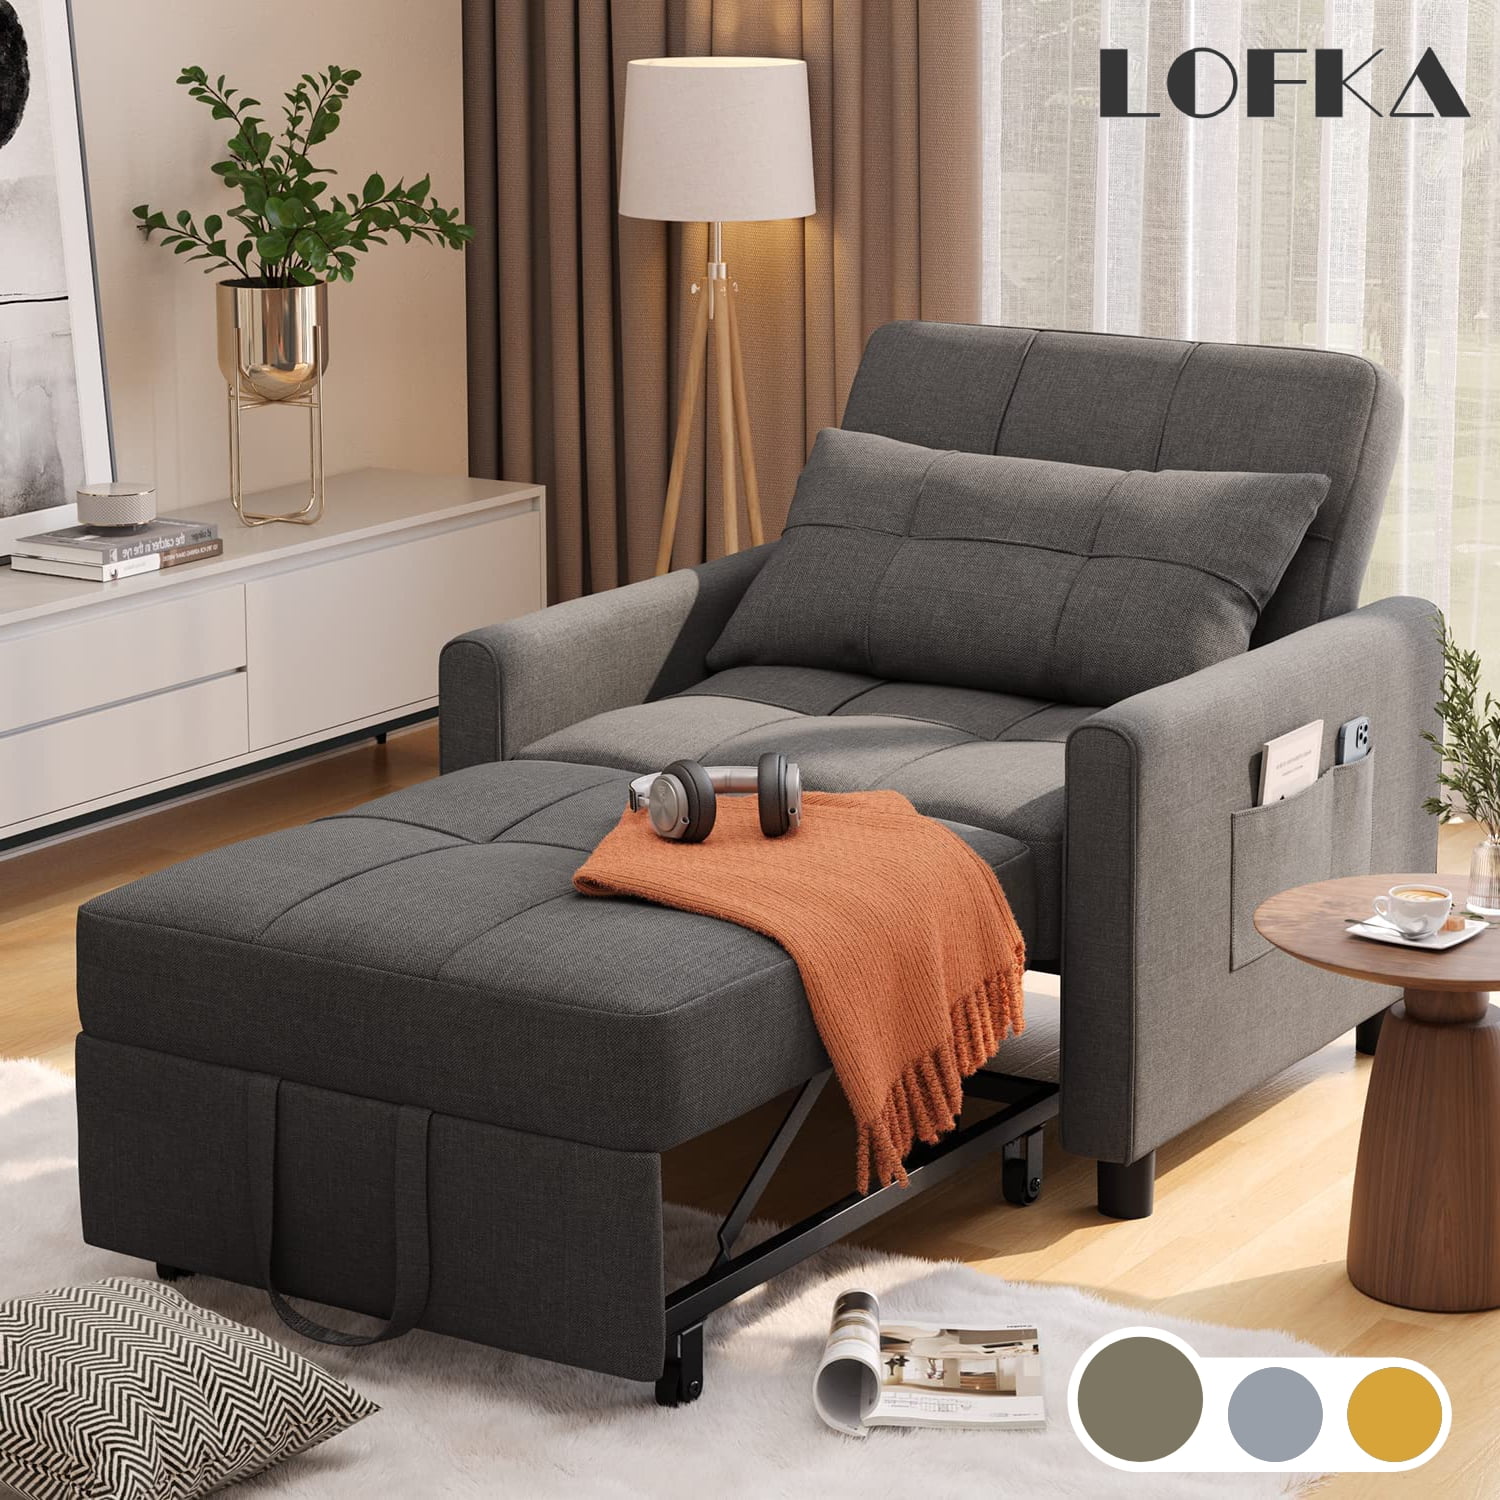 YODOLLA Futon Chair Bed, 3-in-1 Convertible Chair Sleeper for Adults, Pull  Out Sofa Bed with Adjustable Backrest,Sofa,Lounger Chair,Single